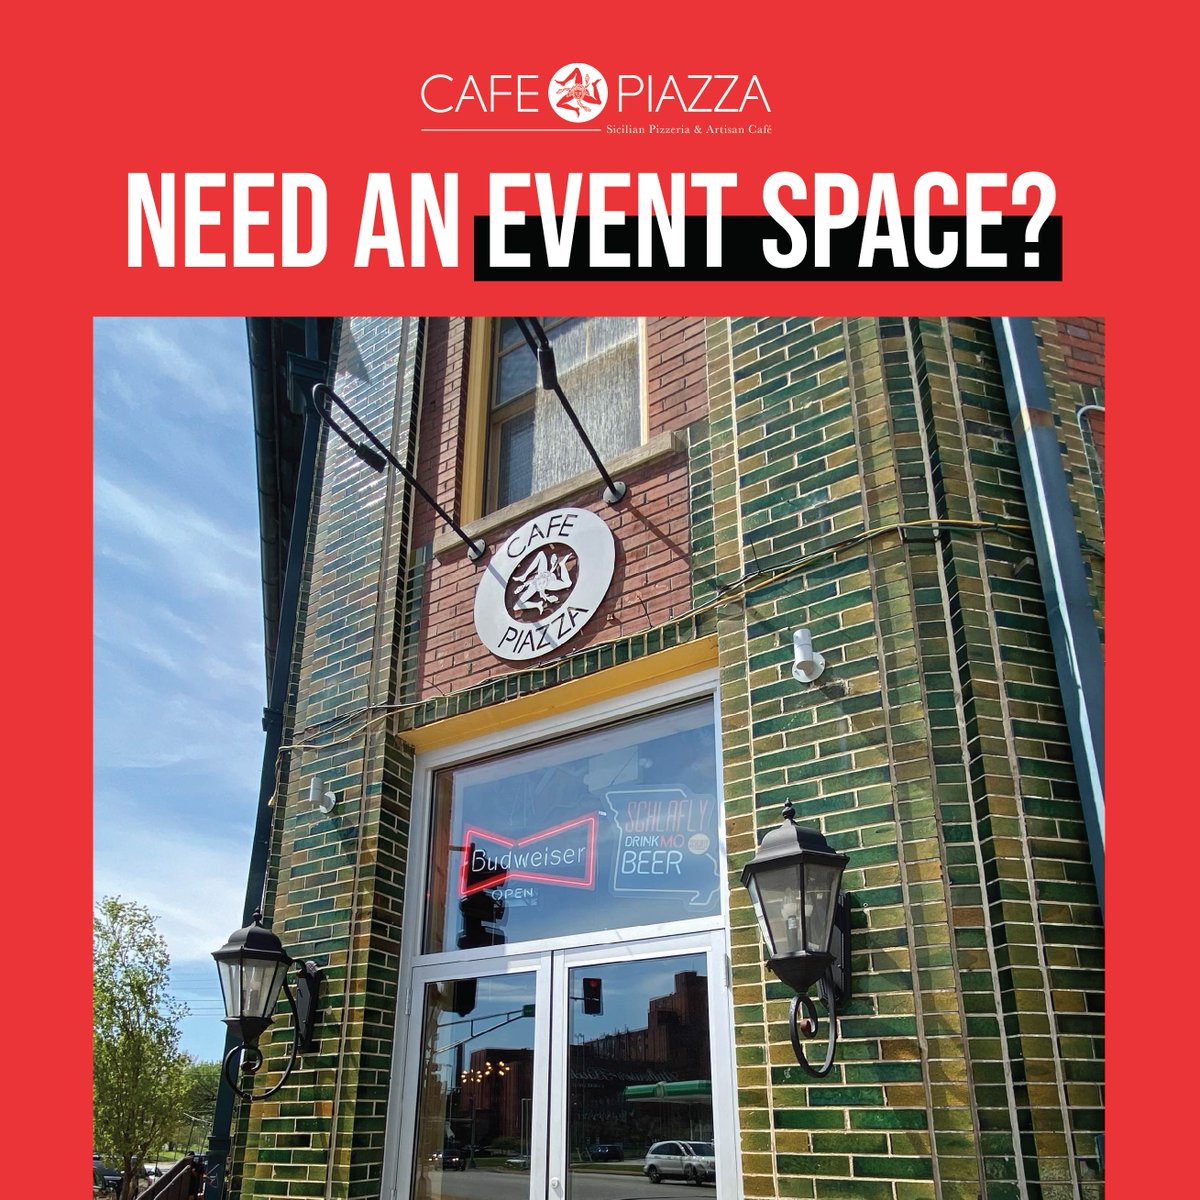 At Cafe Piazza, we love to party! Host your next event with us and enjoy a fun, flavorful gathering. Send us a message about your upcoming happy hour, birthday party, wine-tasting event—you name it! #LetsCollab #CafePiazzaCelebrations #EventEats